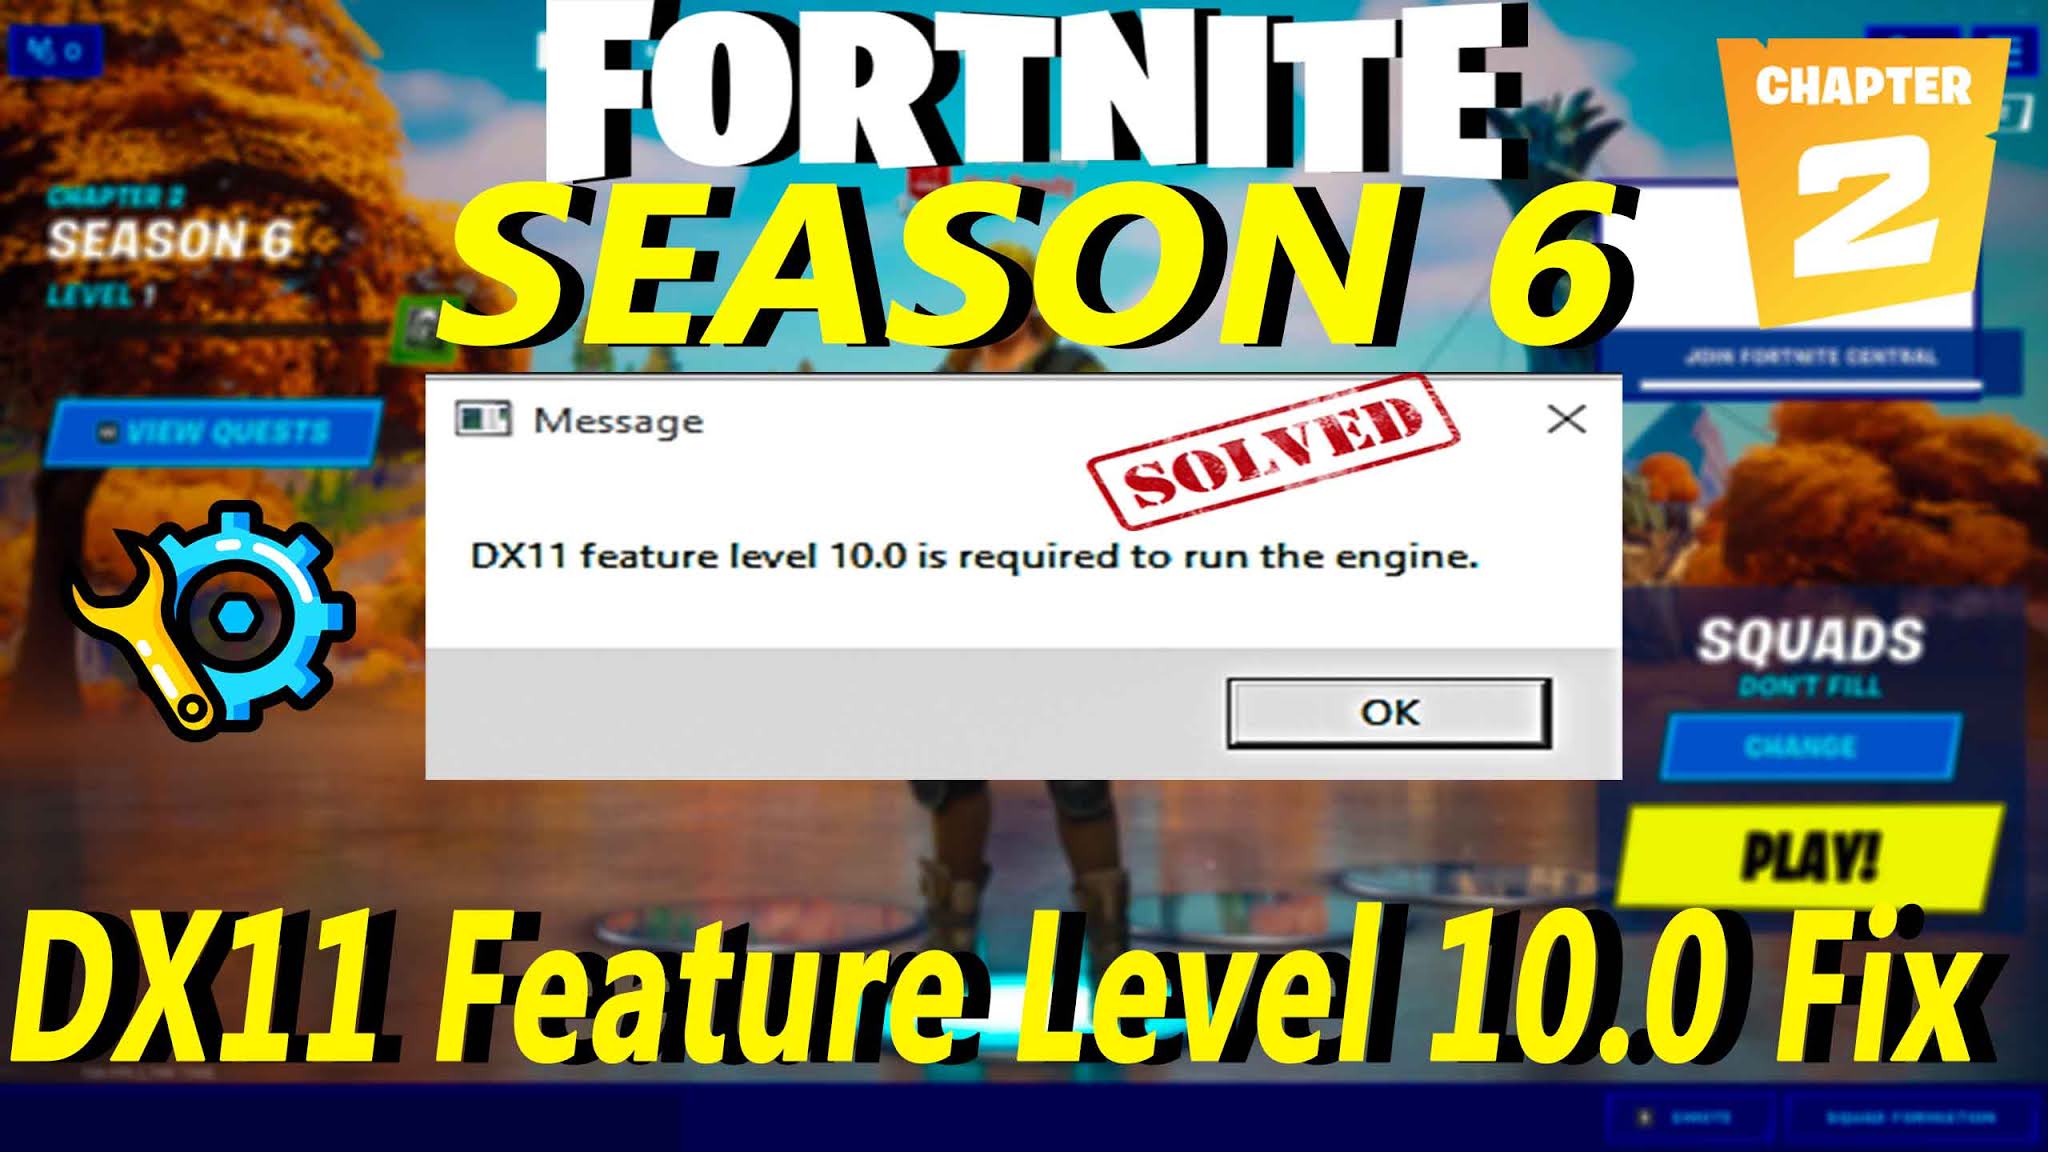 Dx11 feature Level 10.0 is required to Run the engine как исправить. Dx11 feature Level 10.0 is required to Run the engine. Message dx11 feature Level 100 is required to Run the engine что за ошибка.